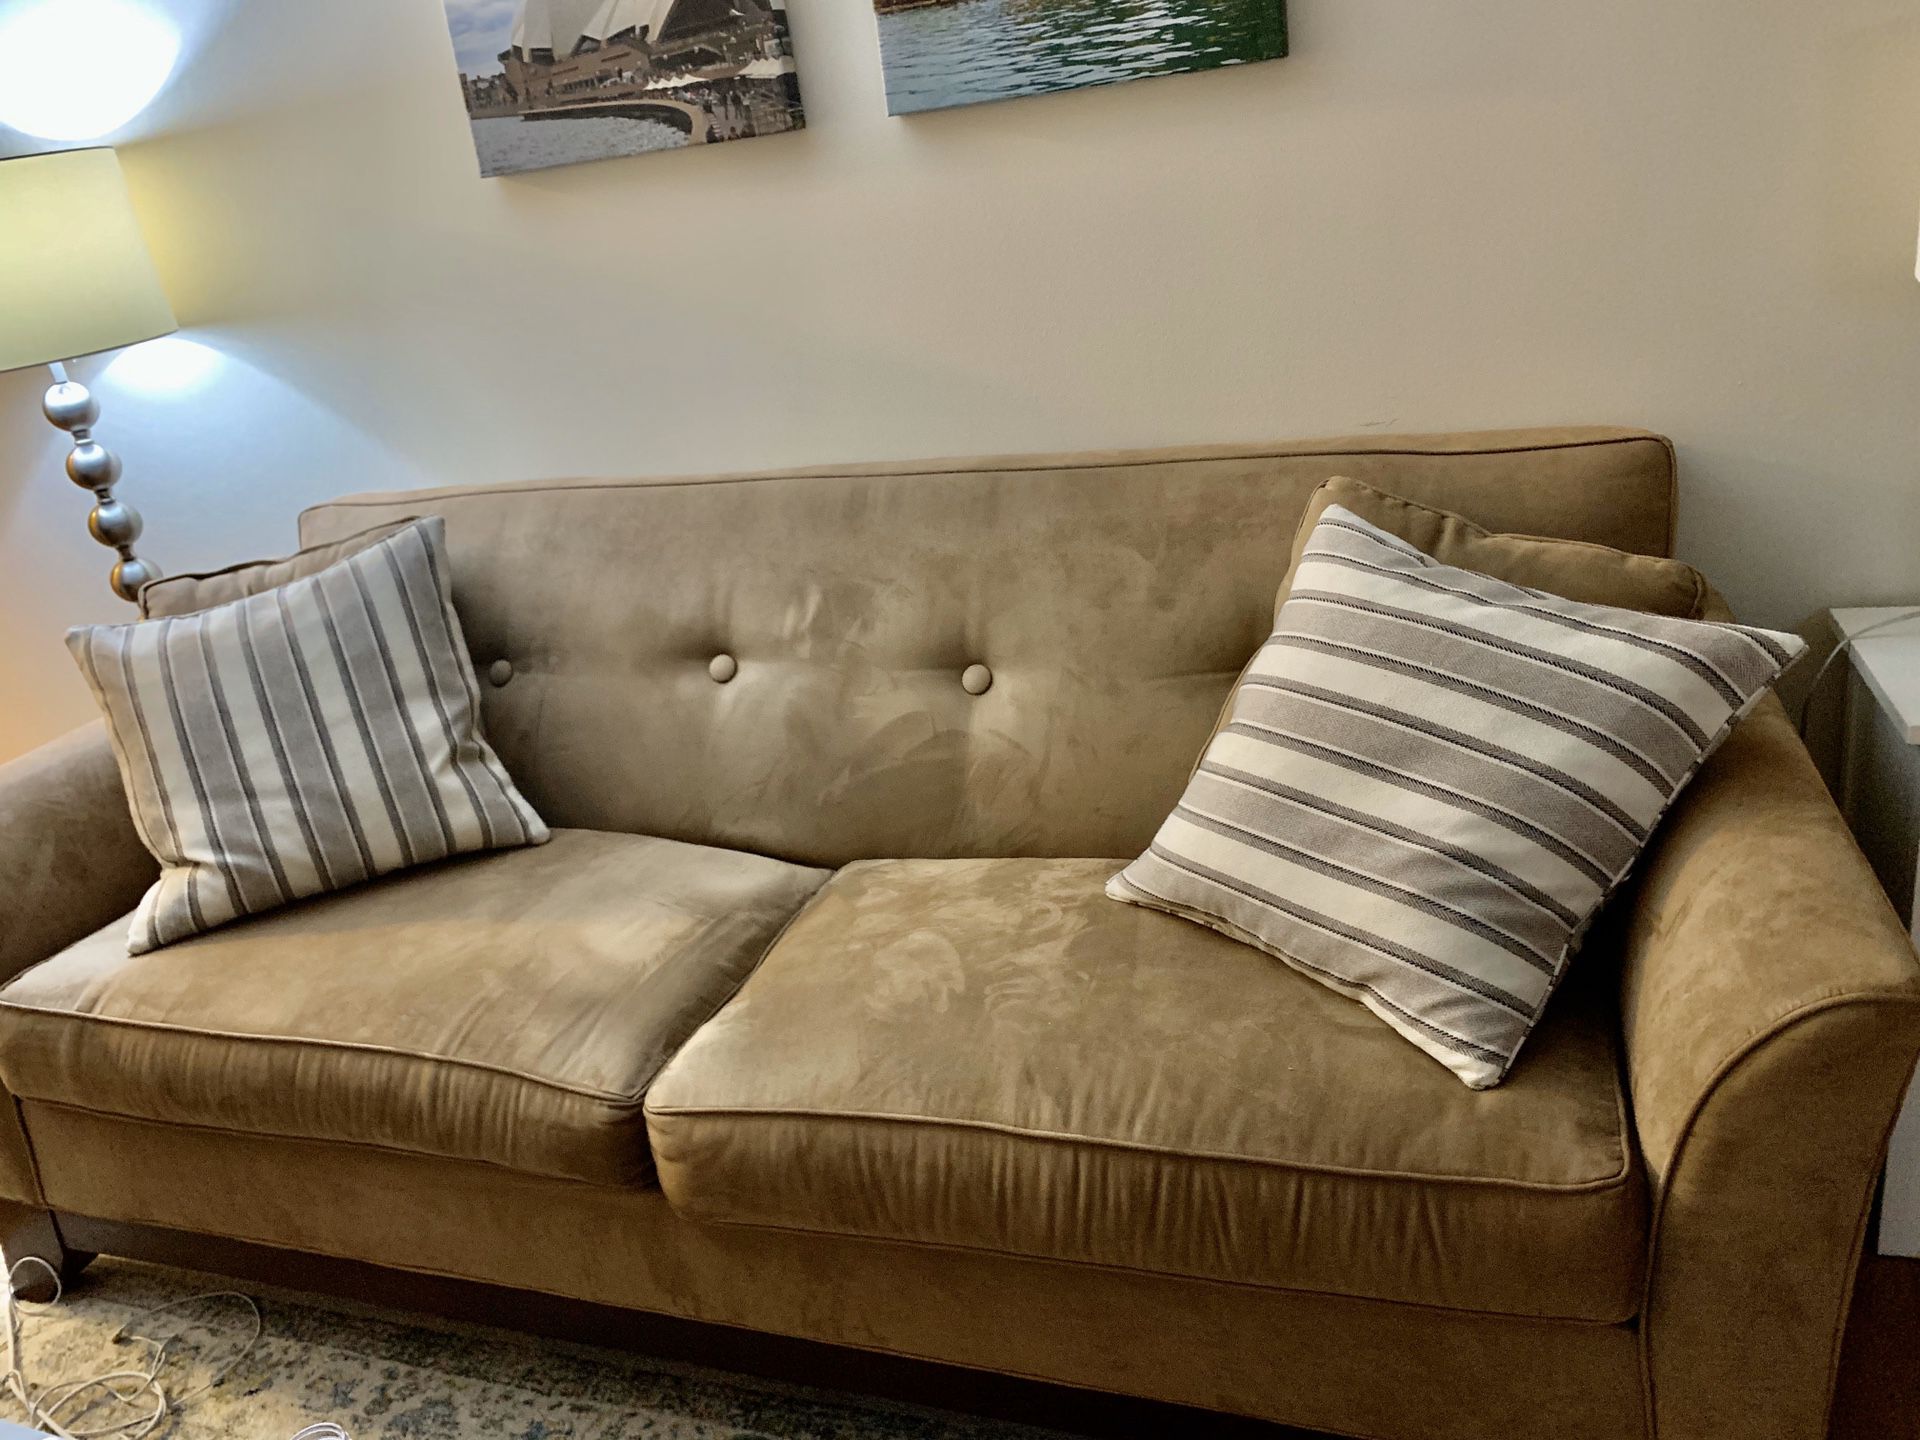 Suede brown couch and pillows